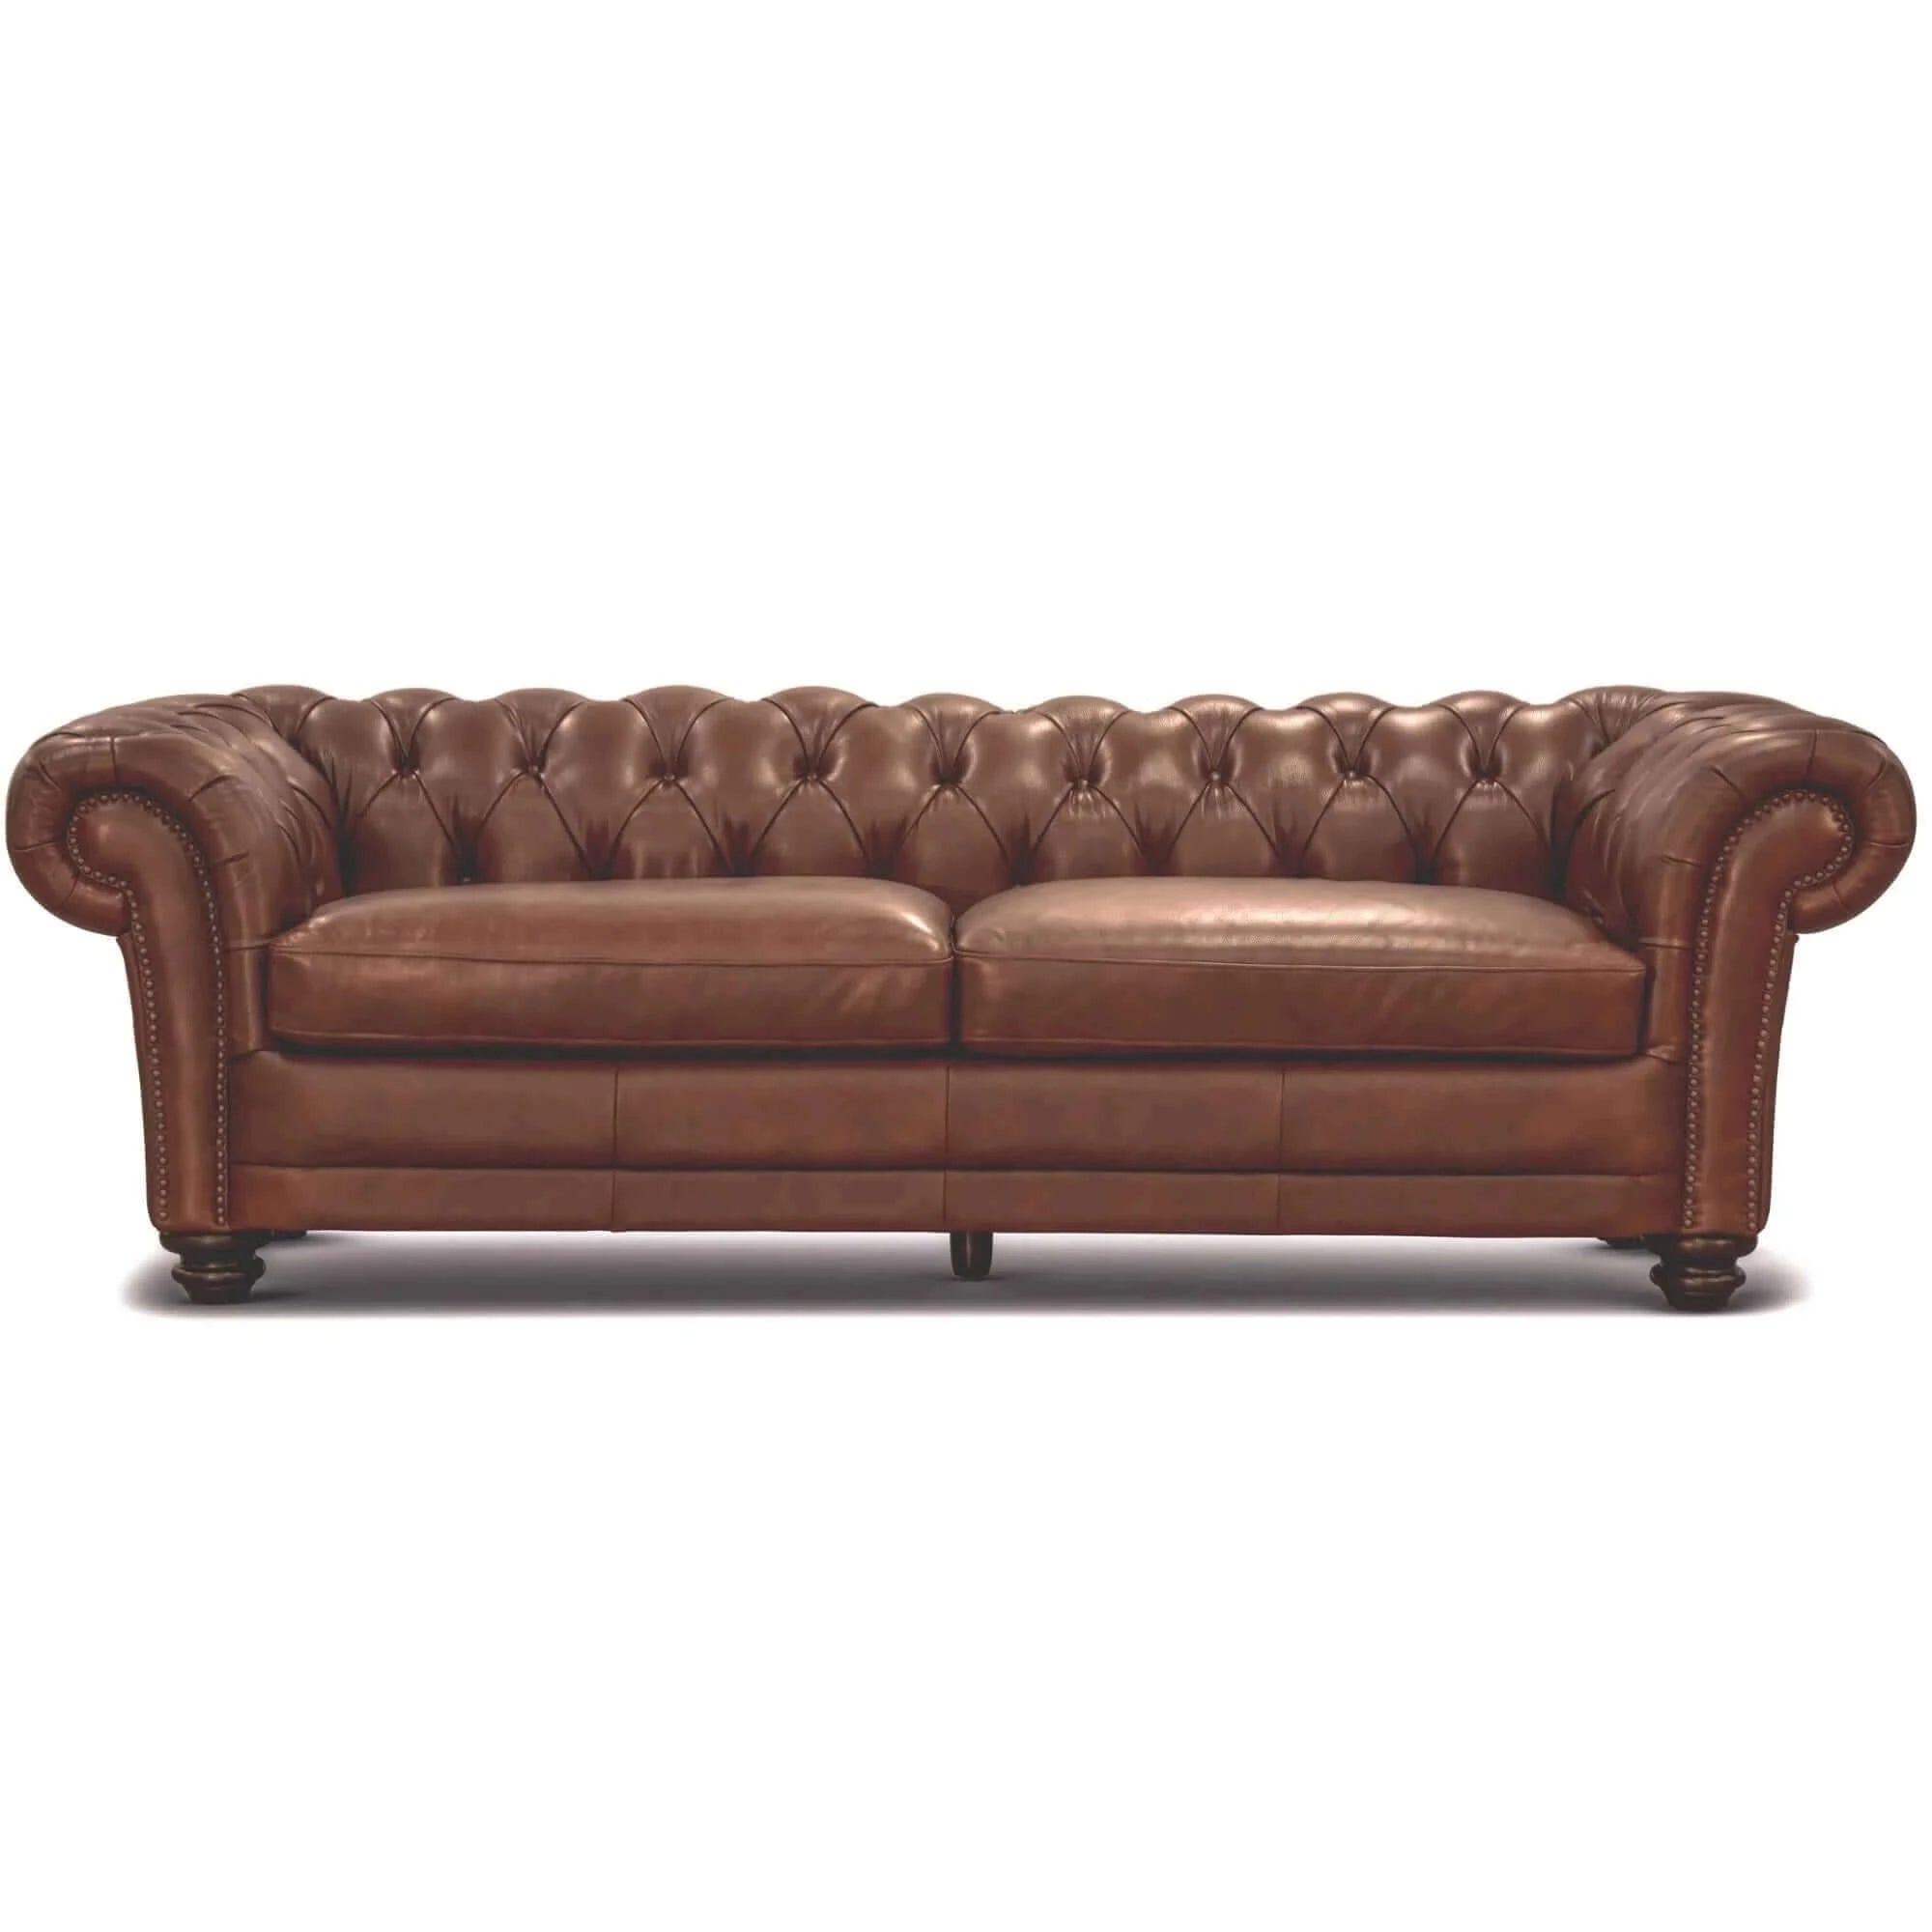 Buy sonny 3+1 seater genuine leather sofa chestfield lounge couch - butterscotch - upinteriors-Upinteriors